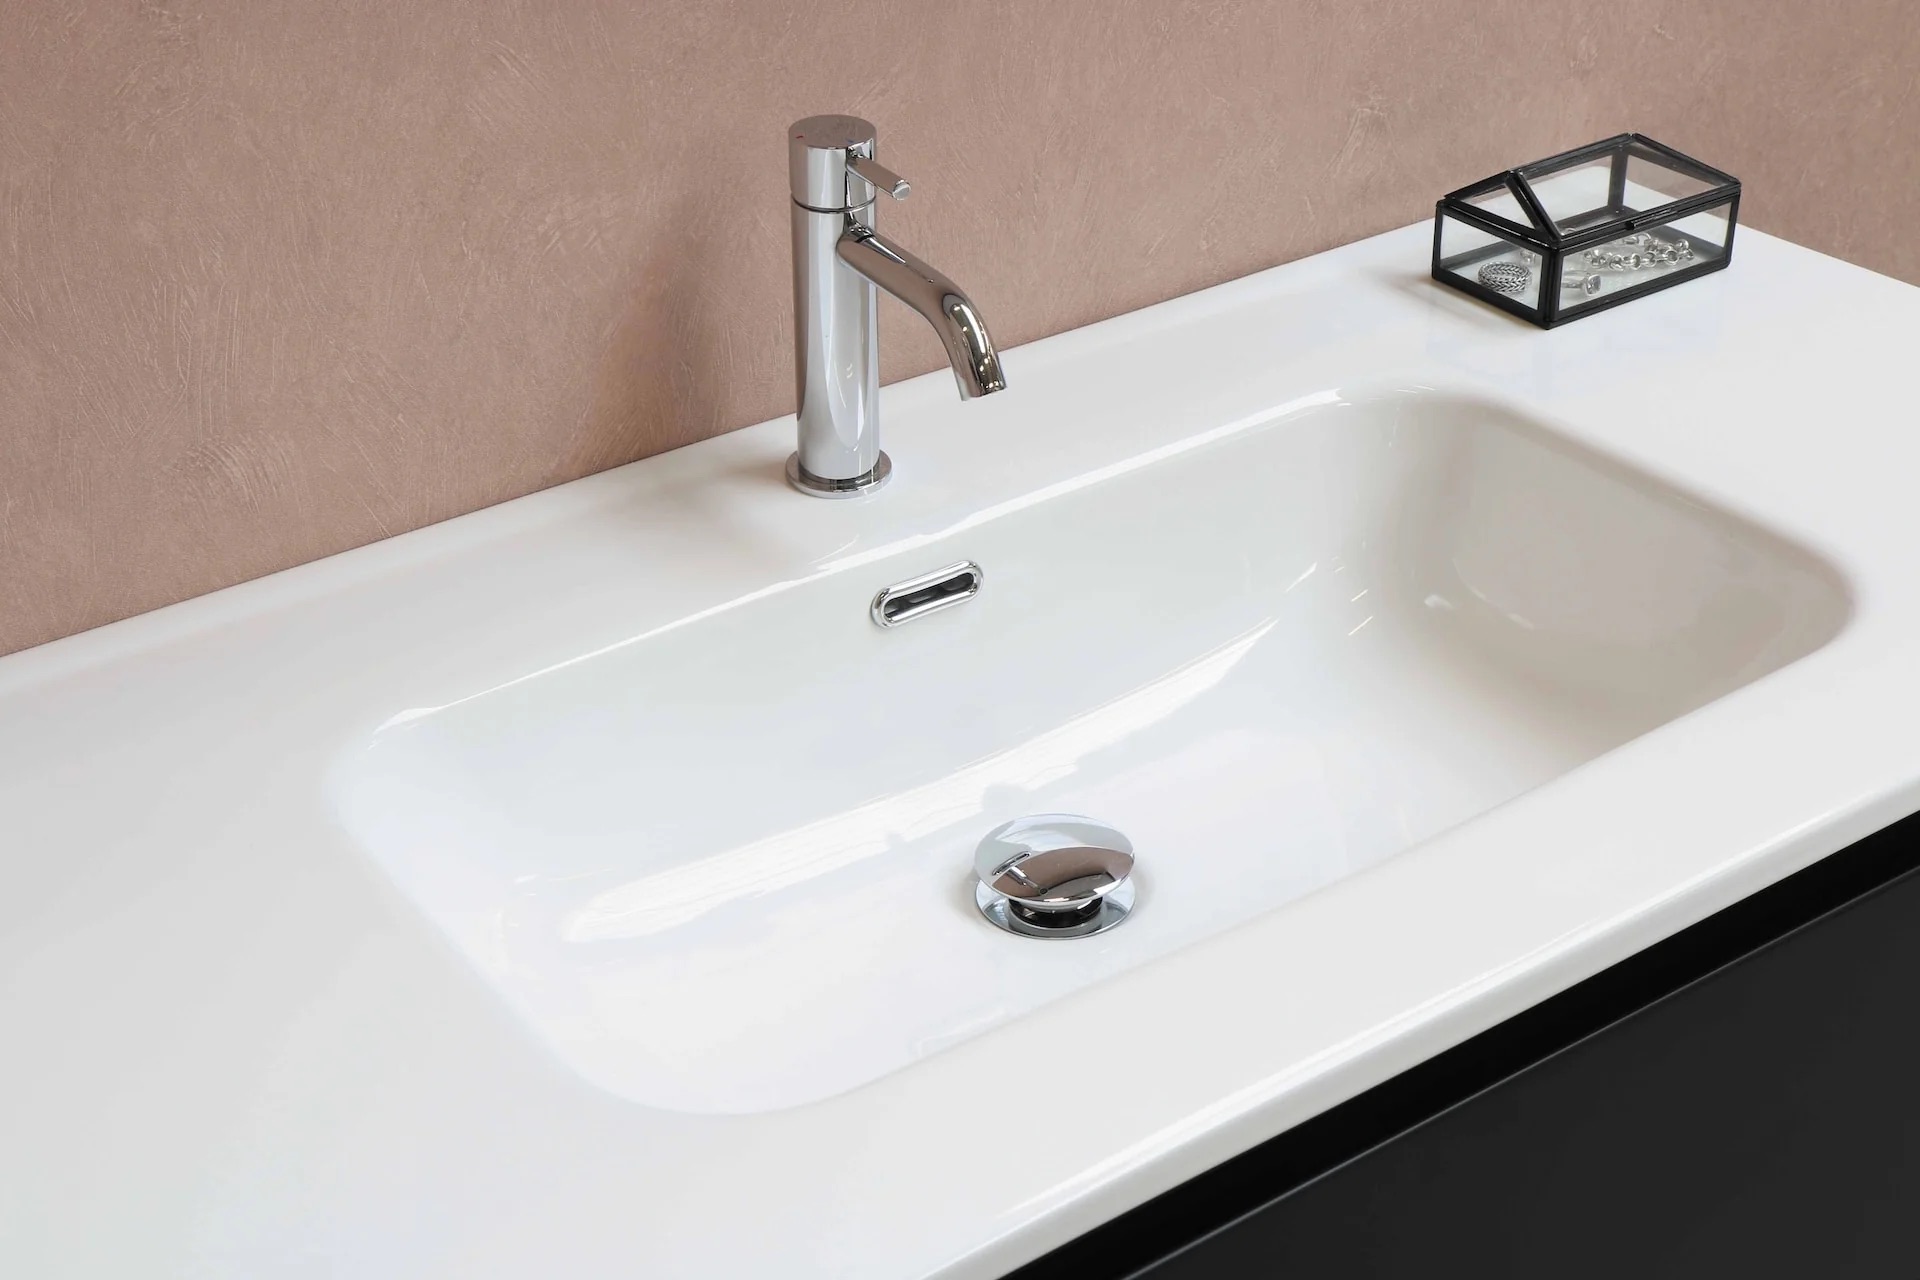 How To Clean A Porcelain Sink: Tips For A Spotless Shine